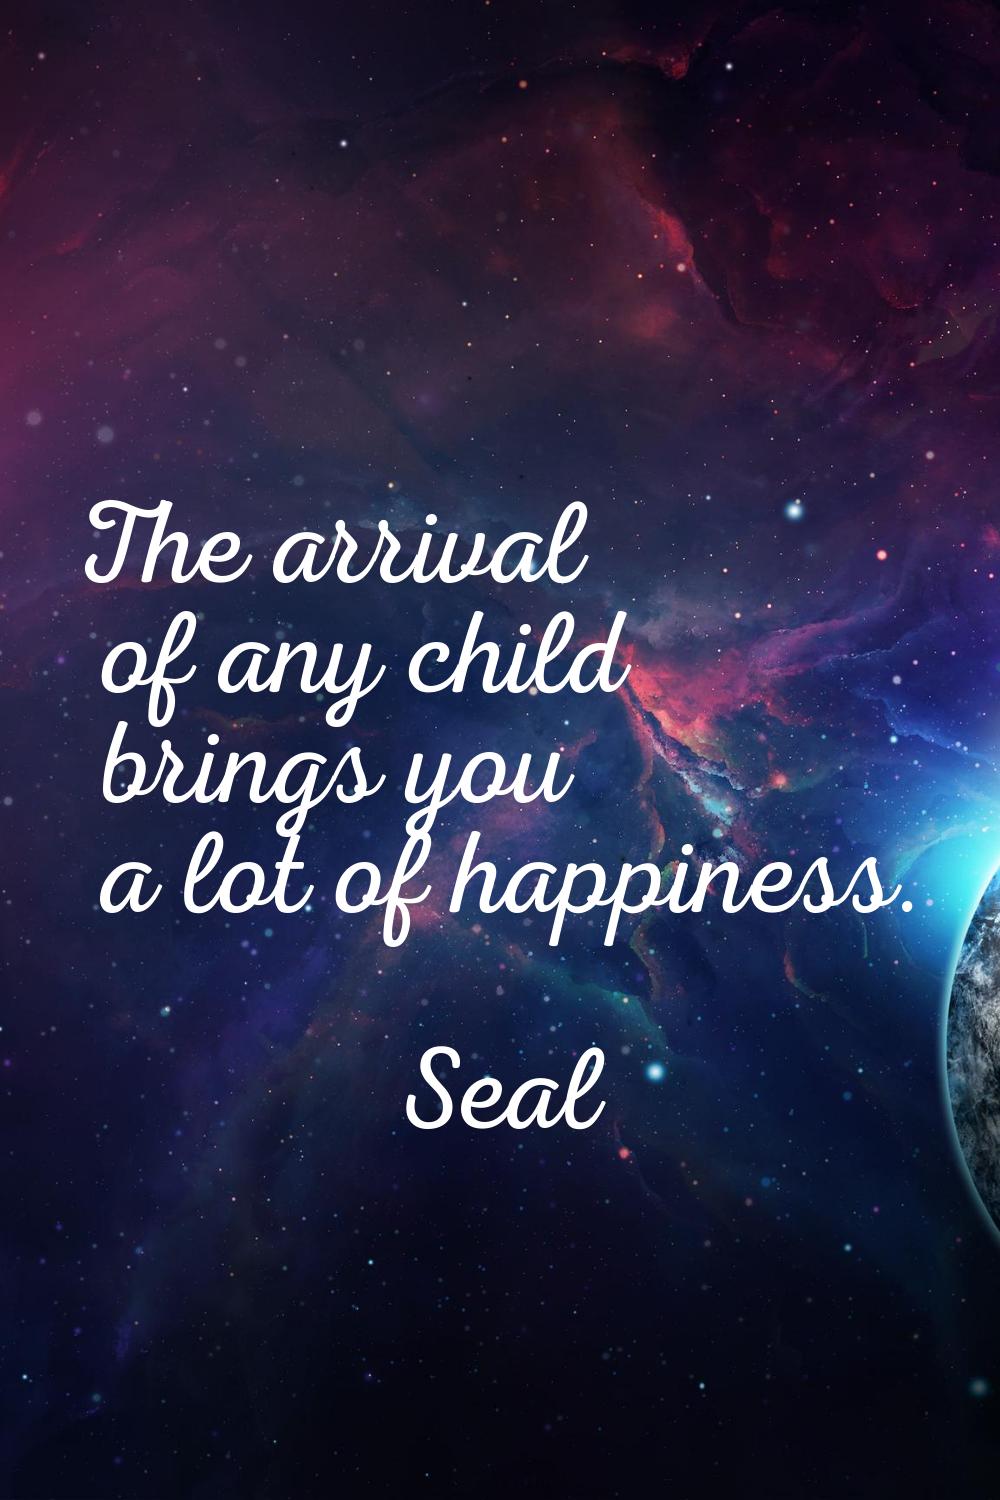 The arrival of any child brings you a lot of happiness.